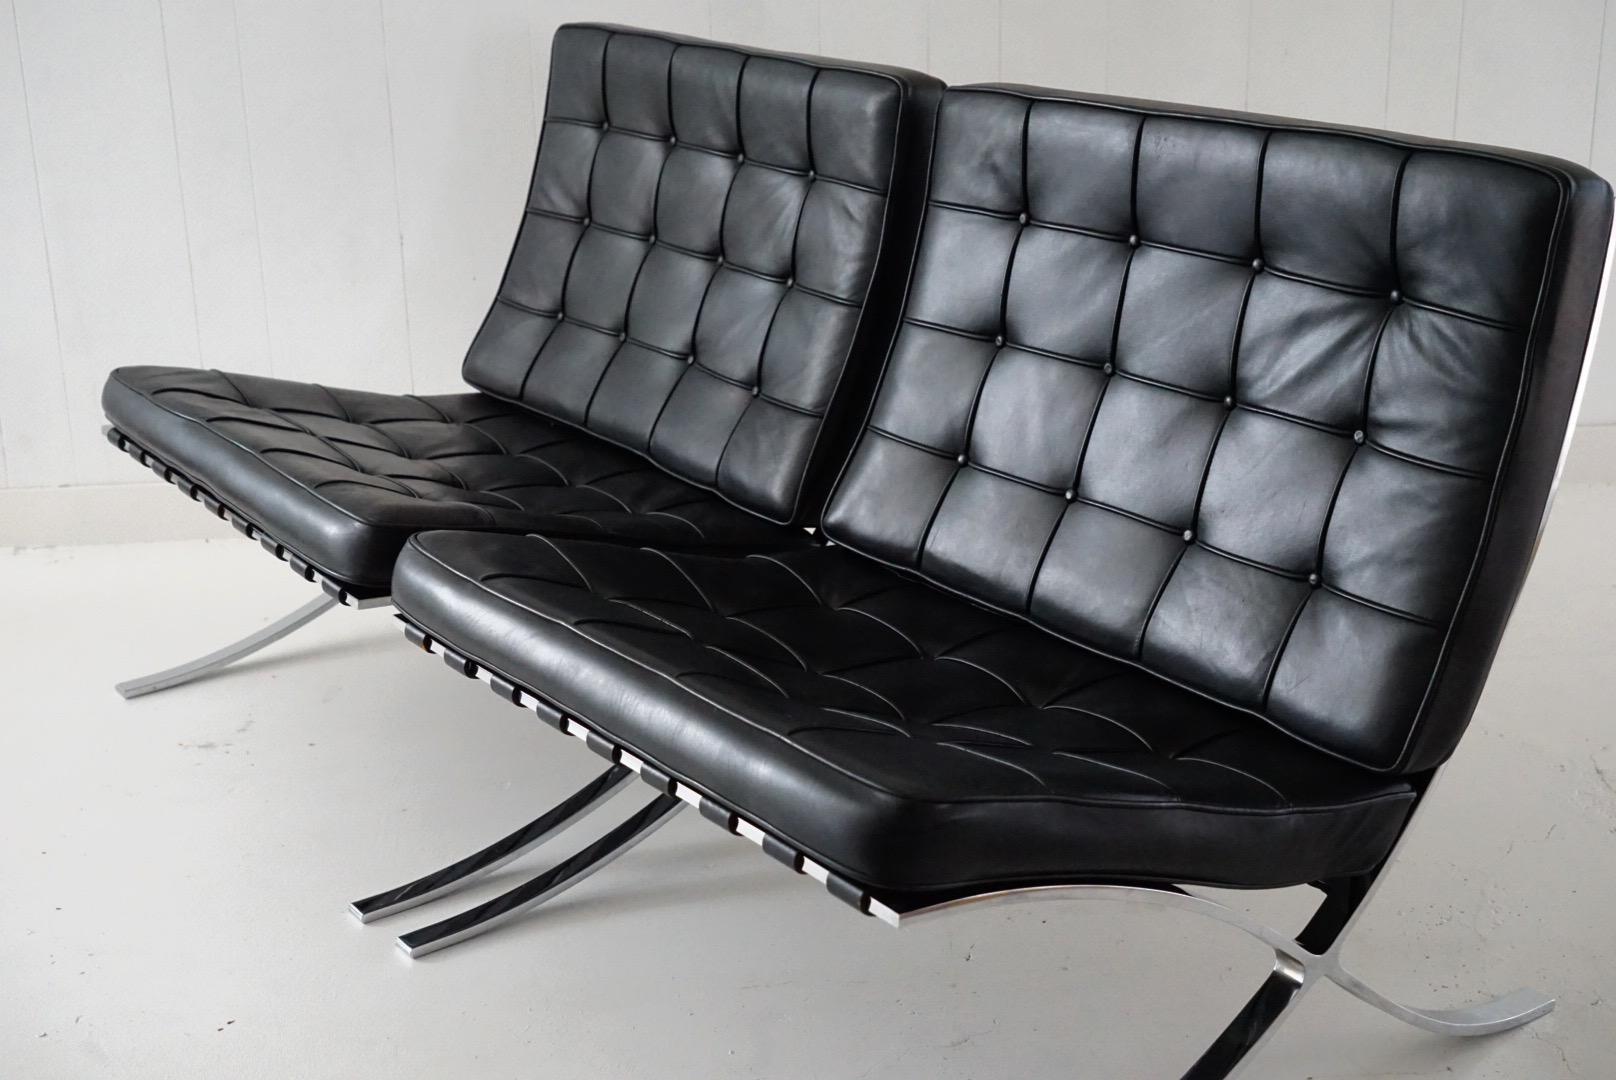 Pair of Barcelona Lounge Chairs by Mies van der Rohe for Knoll Studios, Signed 13